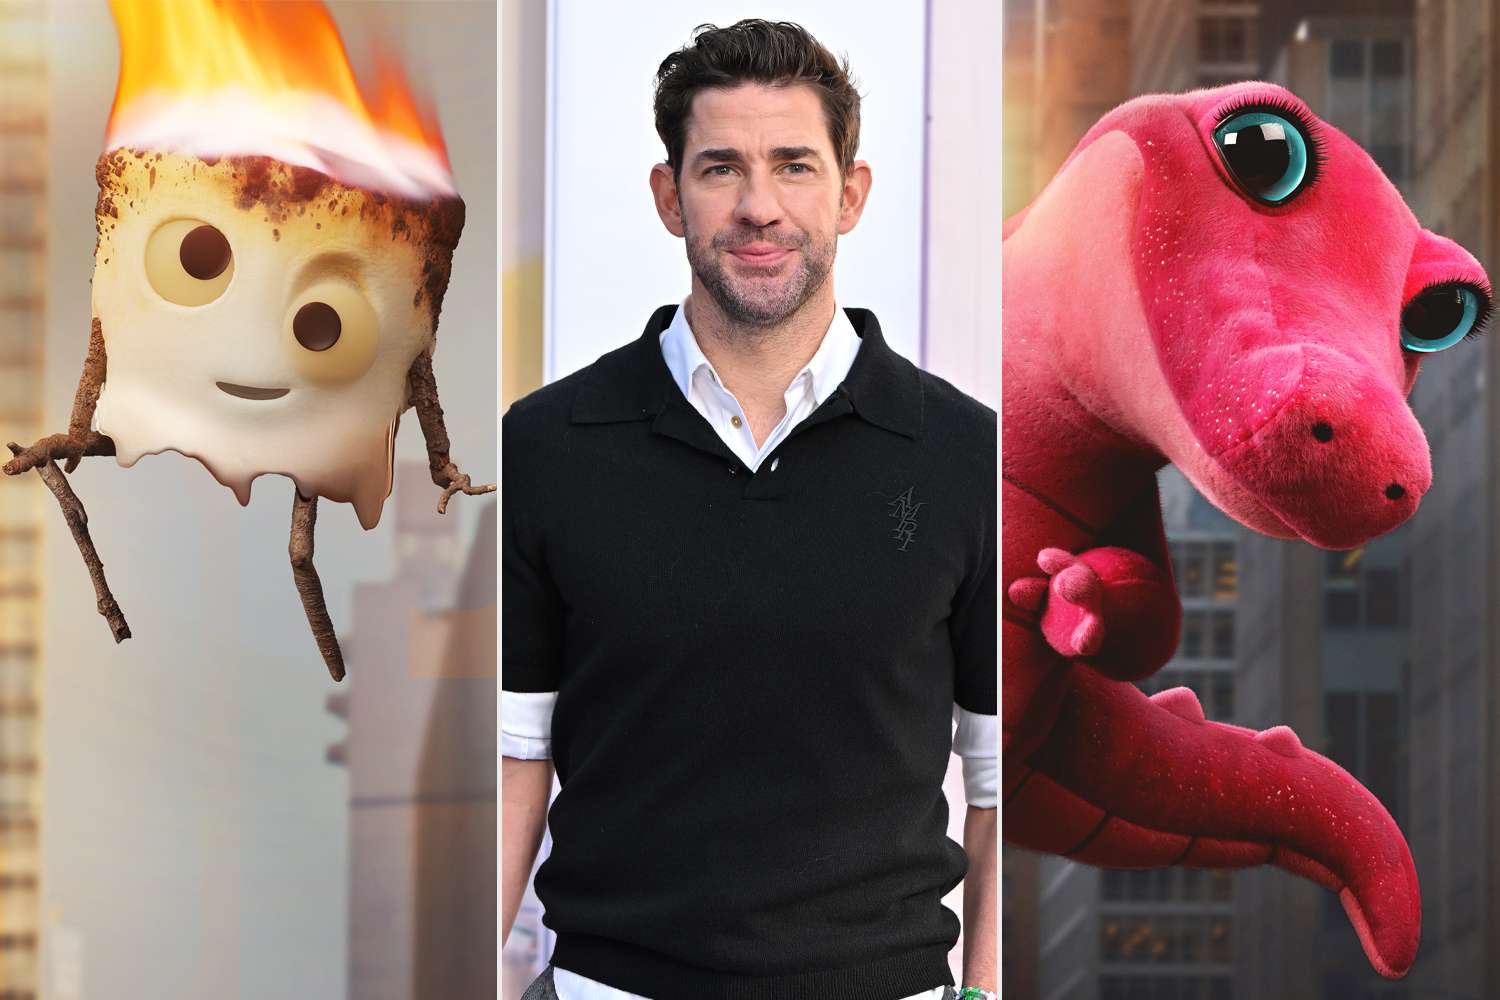 John Krasinski Shares How His Kids’ Imaginary Friends Inspired the Family Movie “IF” (Exclusive)